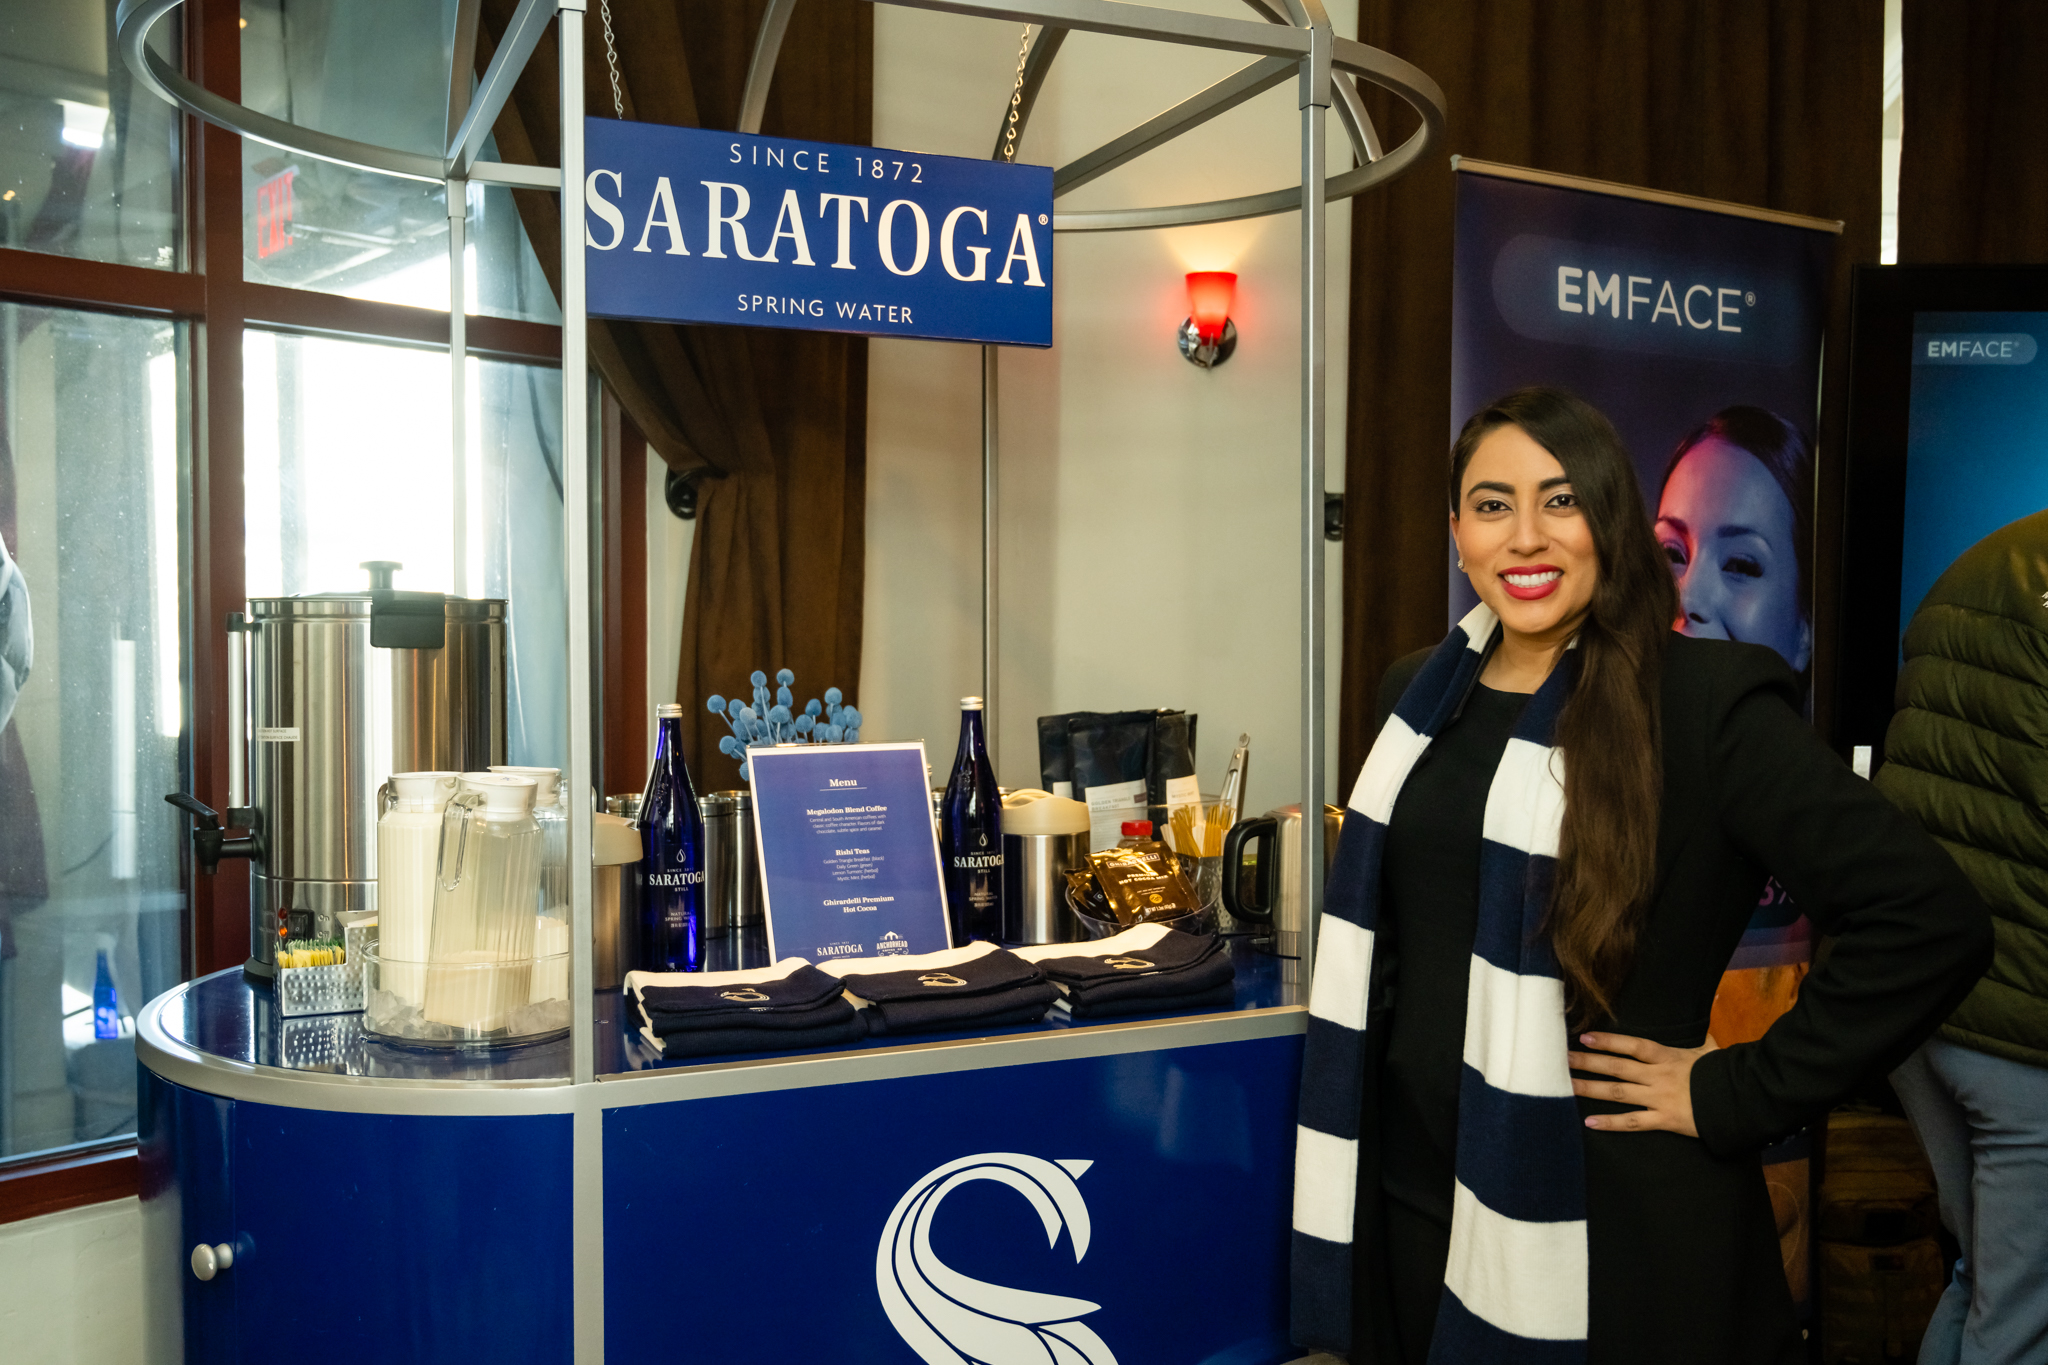 A brand ambassador in front of a Saratoga Spring Water drink cart.